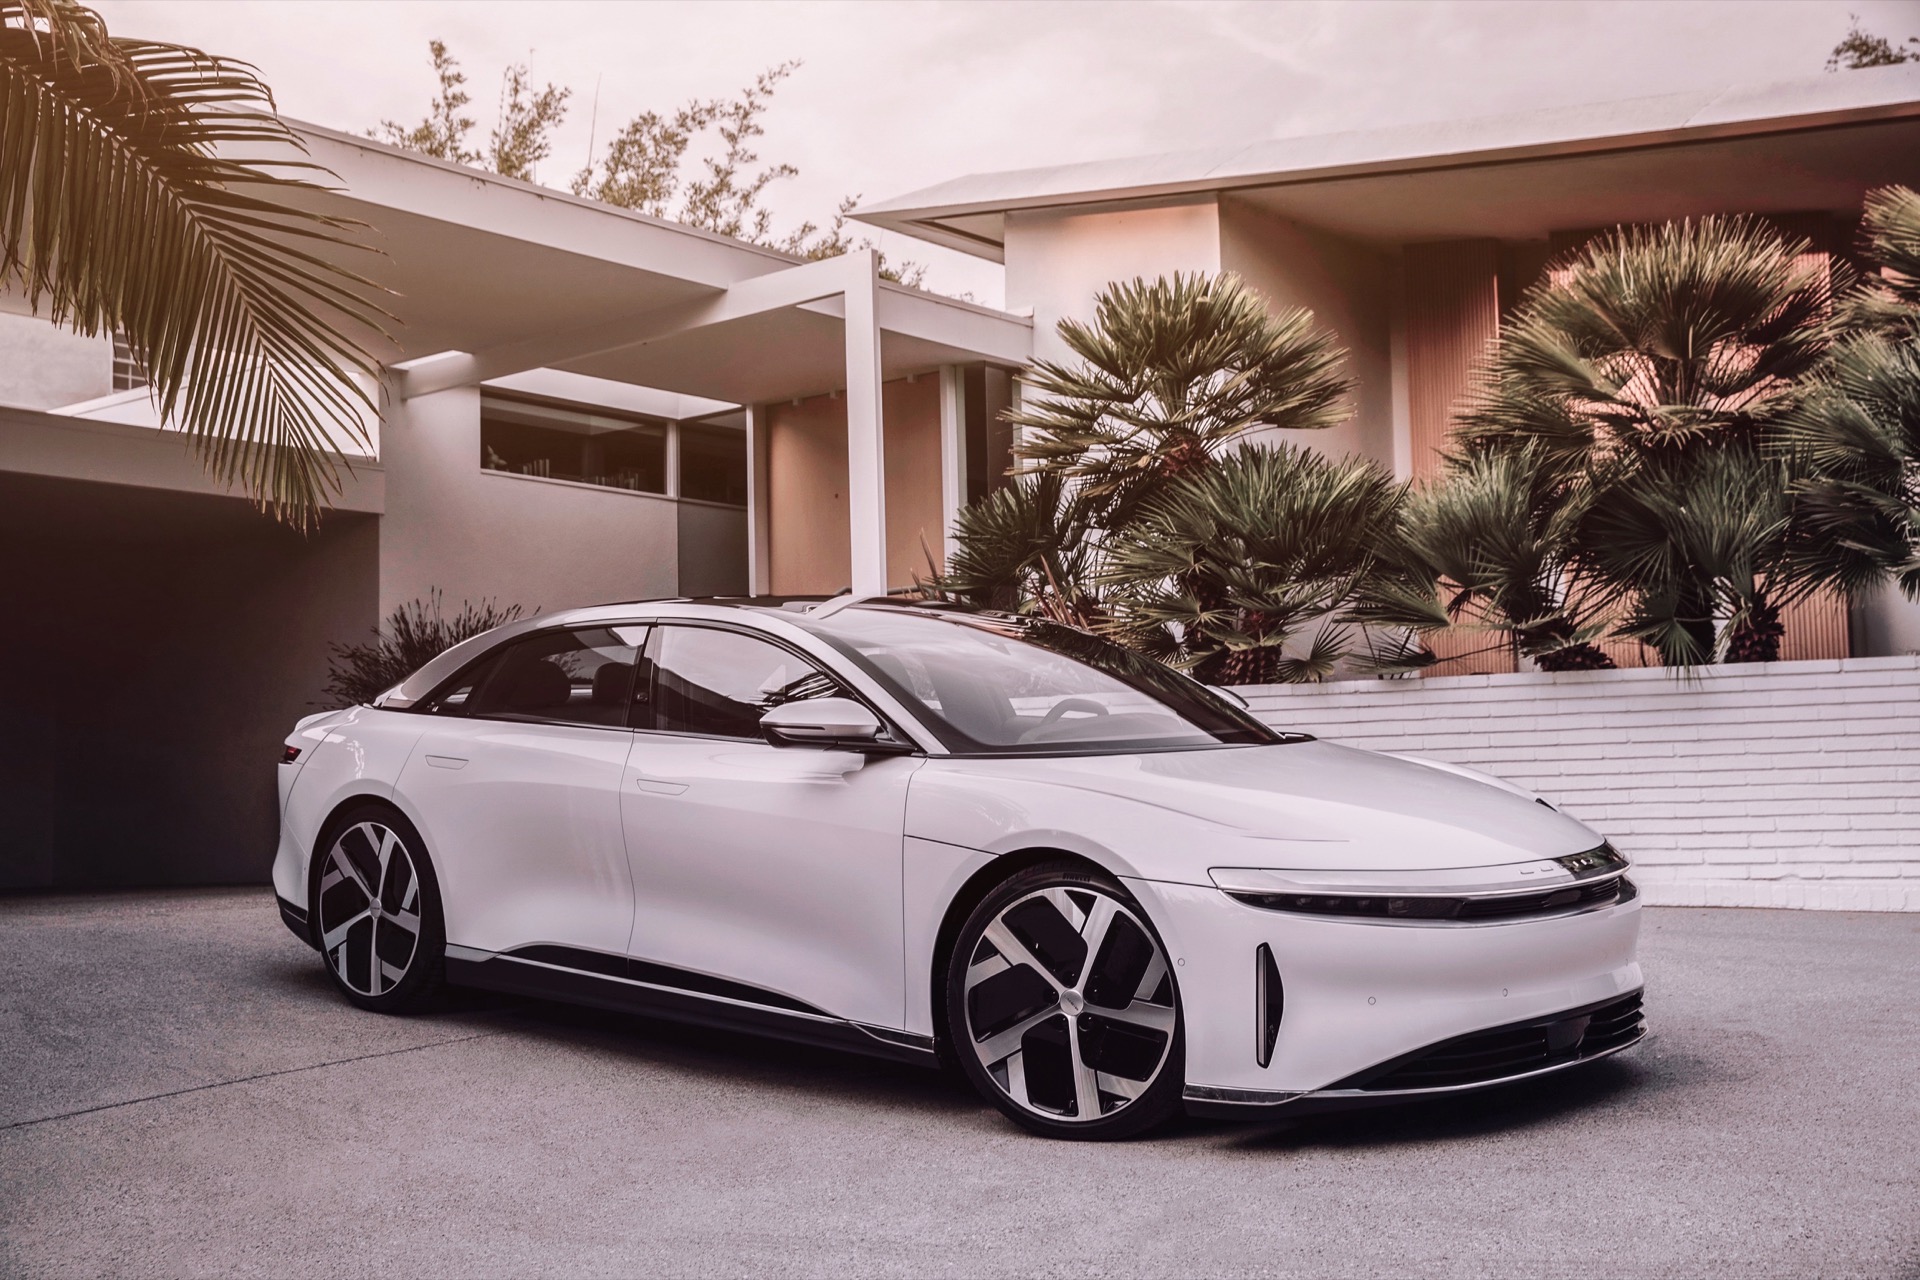 Lucid Air Dream Edition: 500-mile rating likely for Range versionLucid Air Dream Edition: 500-mile rating likely for Range version